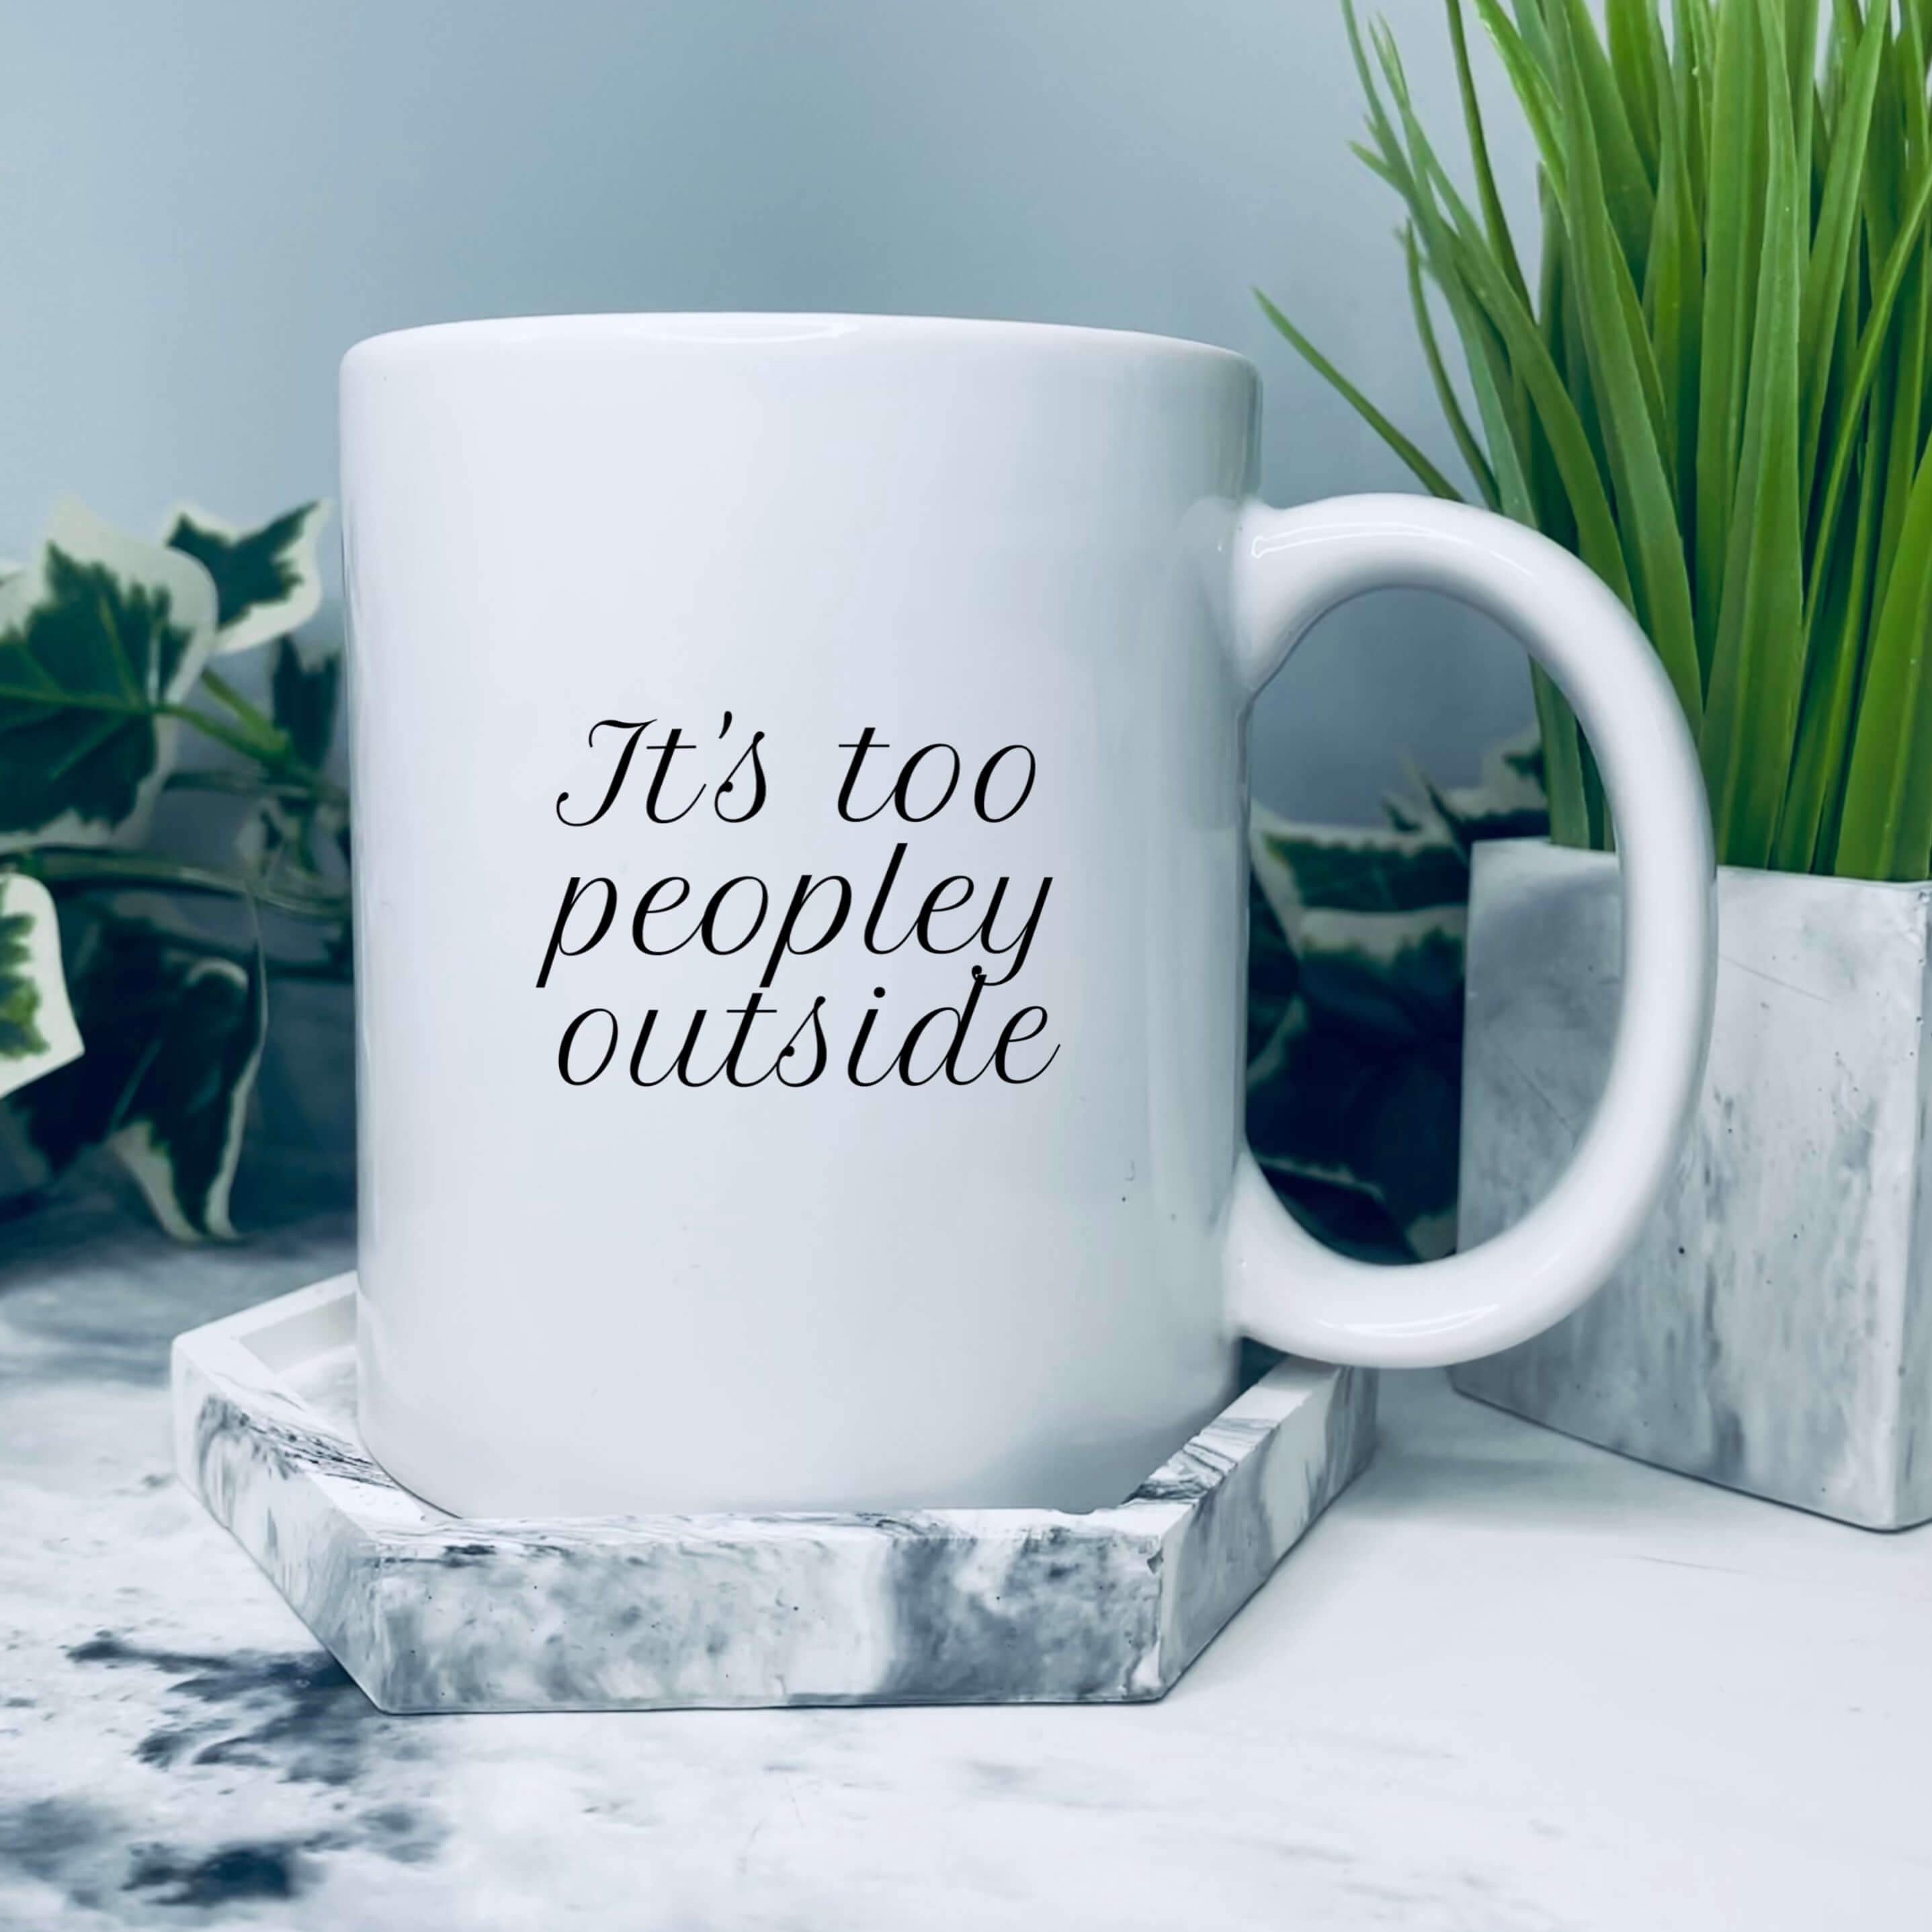 Mug that says: It's too peopley outside